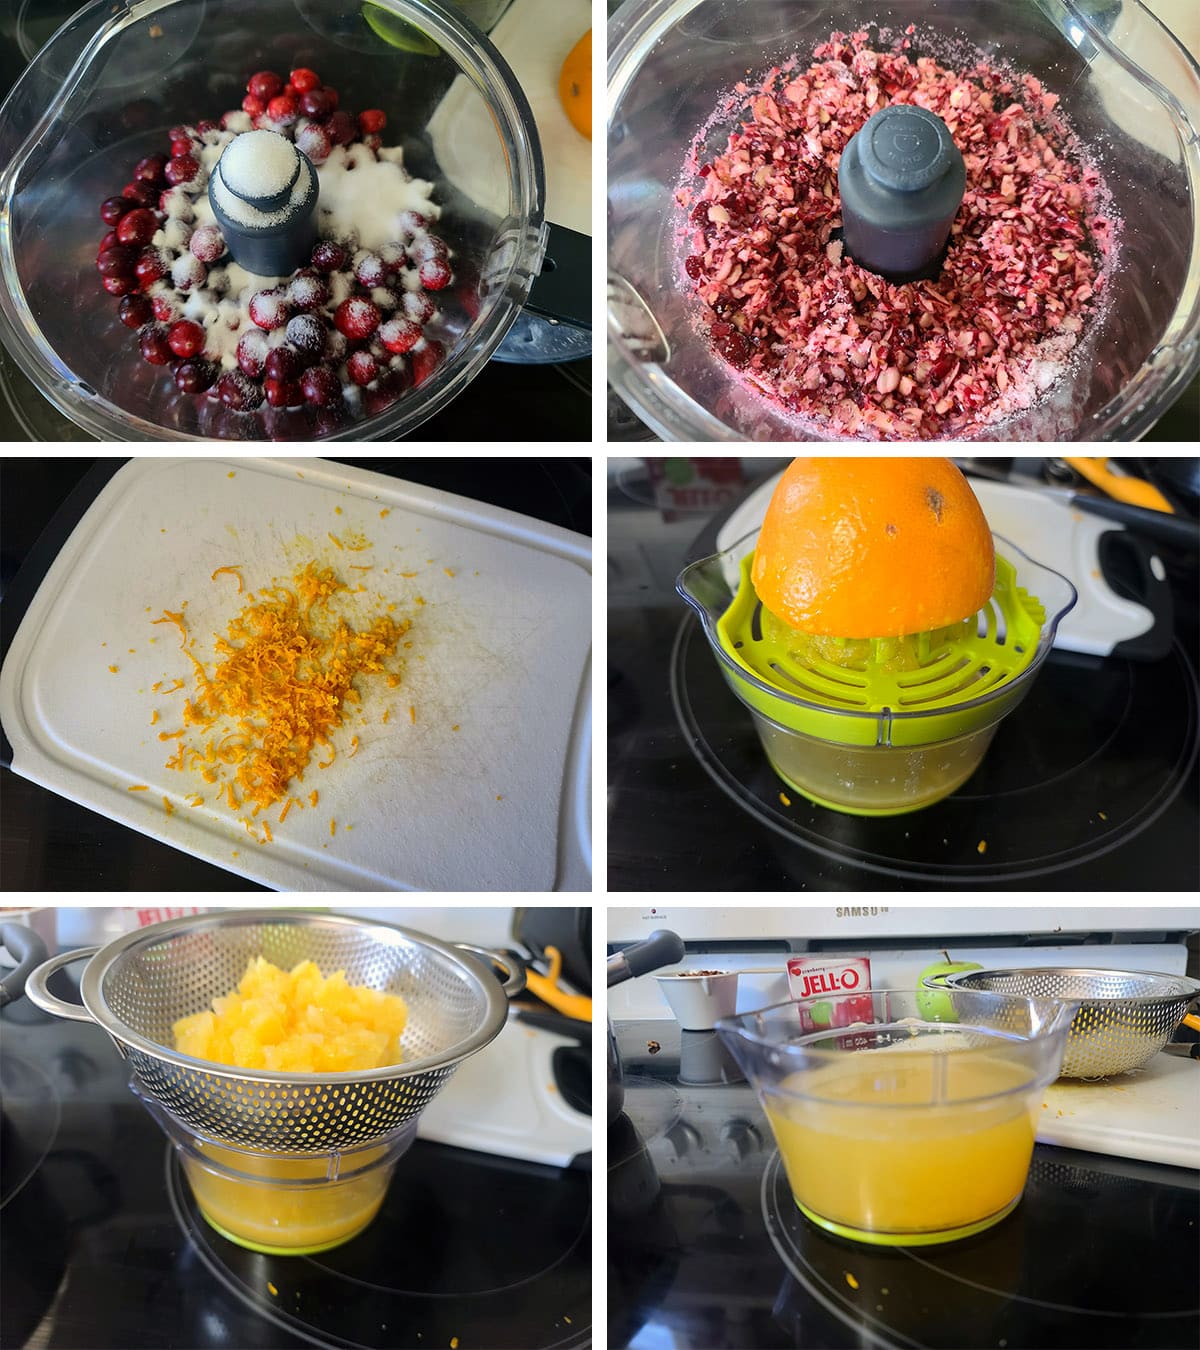 A 5 part image showing the cranberries and orange being prepared.